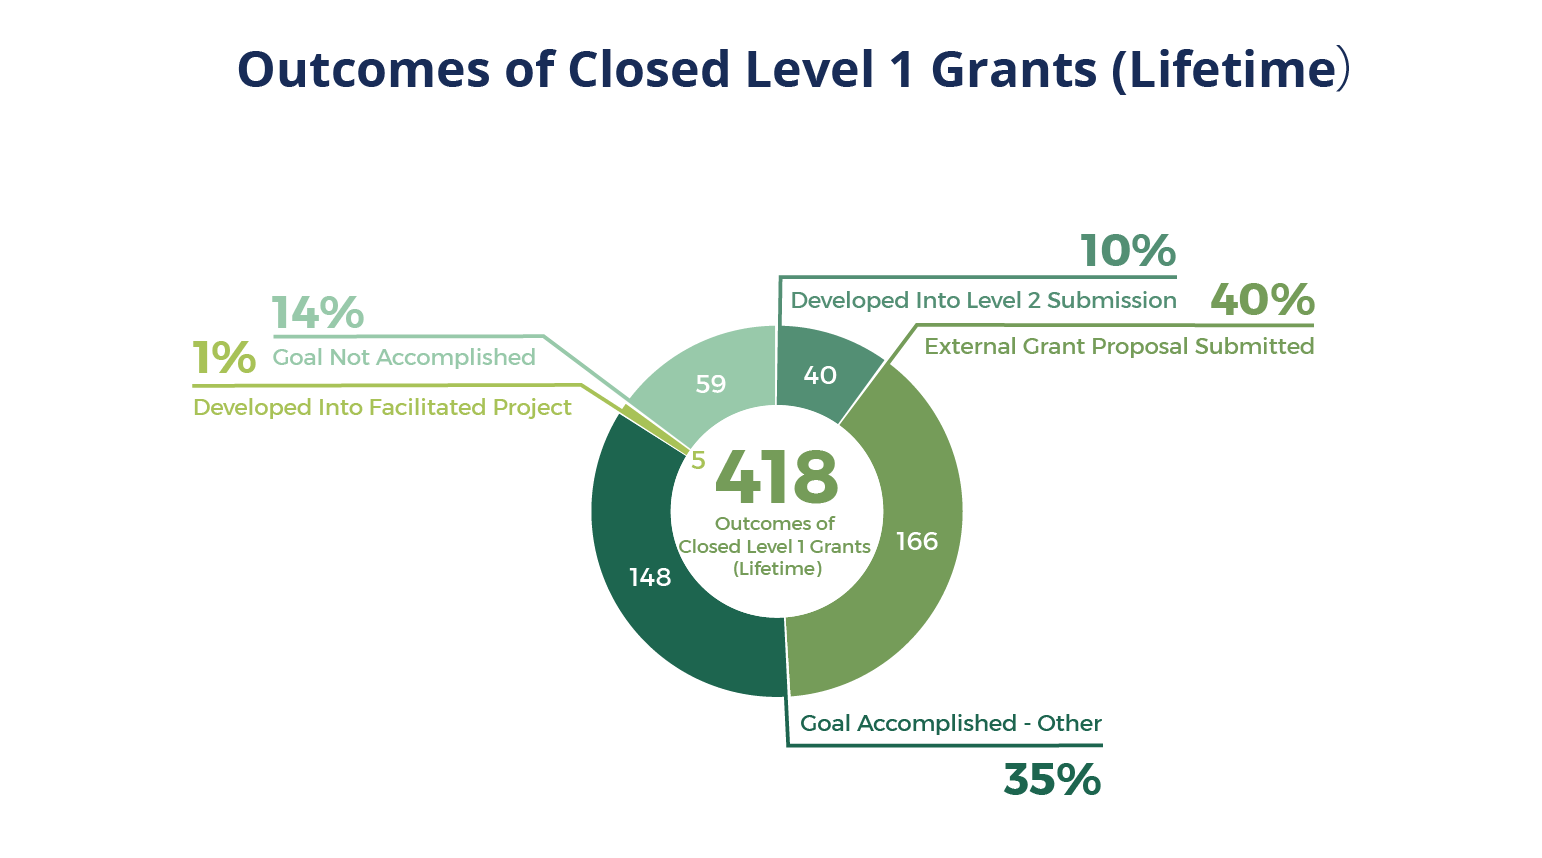 Pie chart of Outcomes of Closed Level 1 Grants (Lifetime).